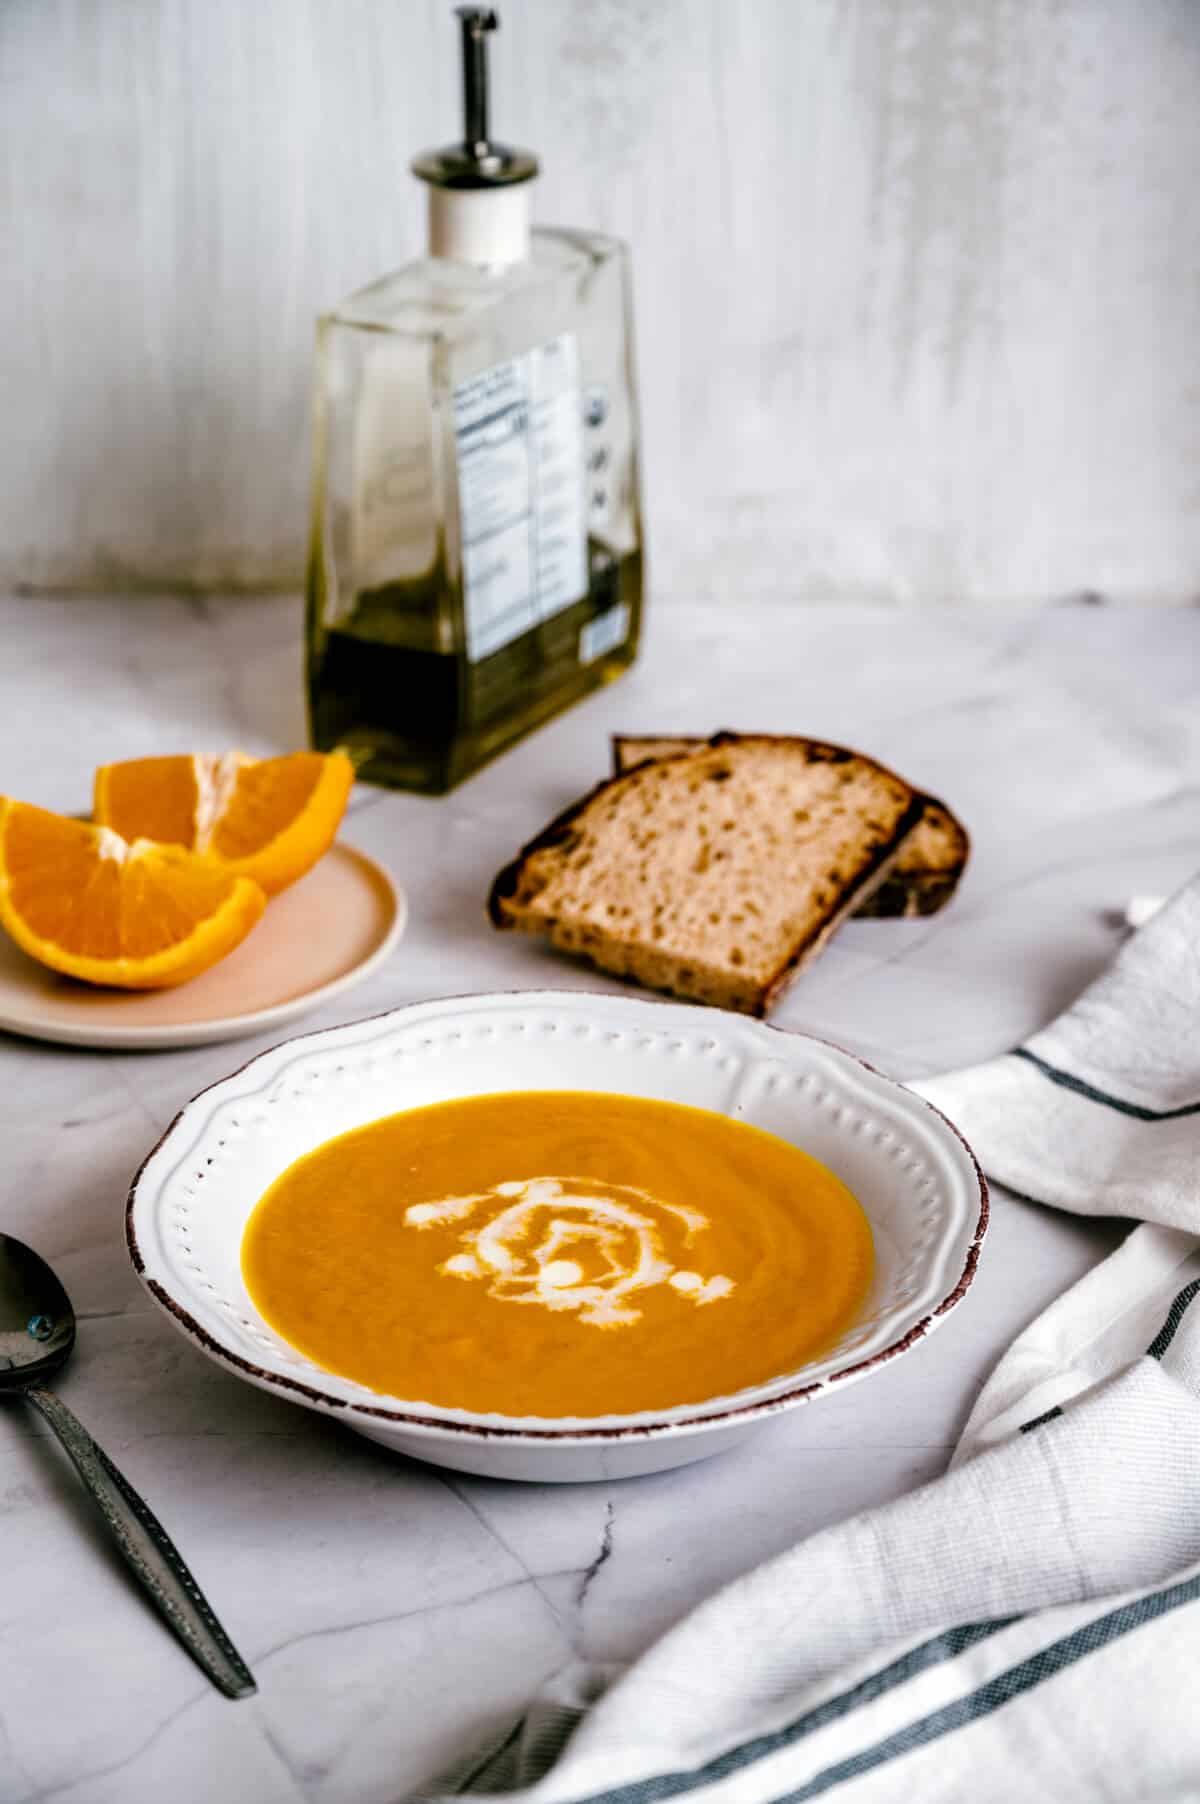 45 degree angle shot of a white bowl of carrot orange soup with a plate of orange segments and two slices of toast in the background.